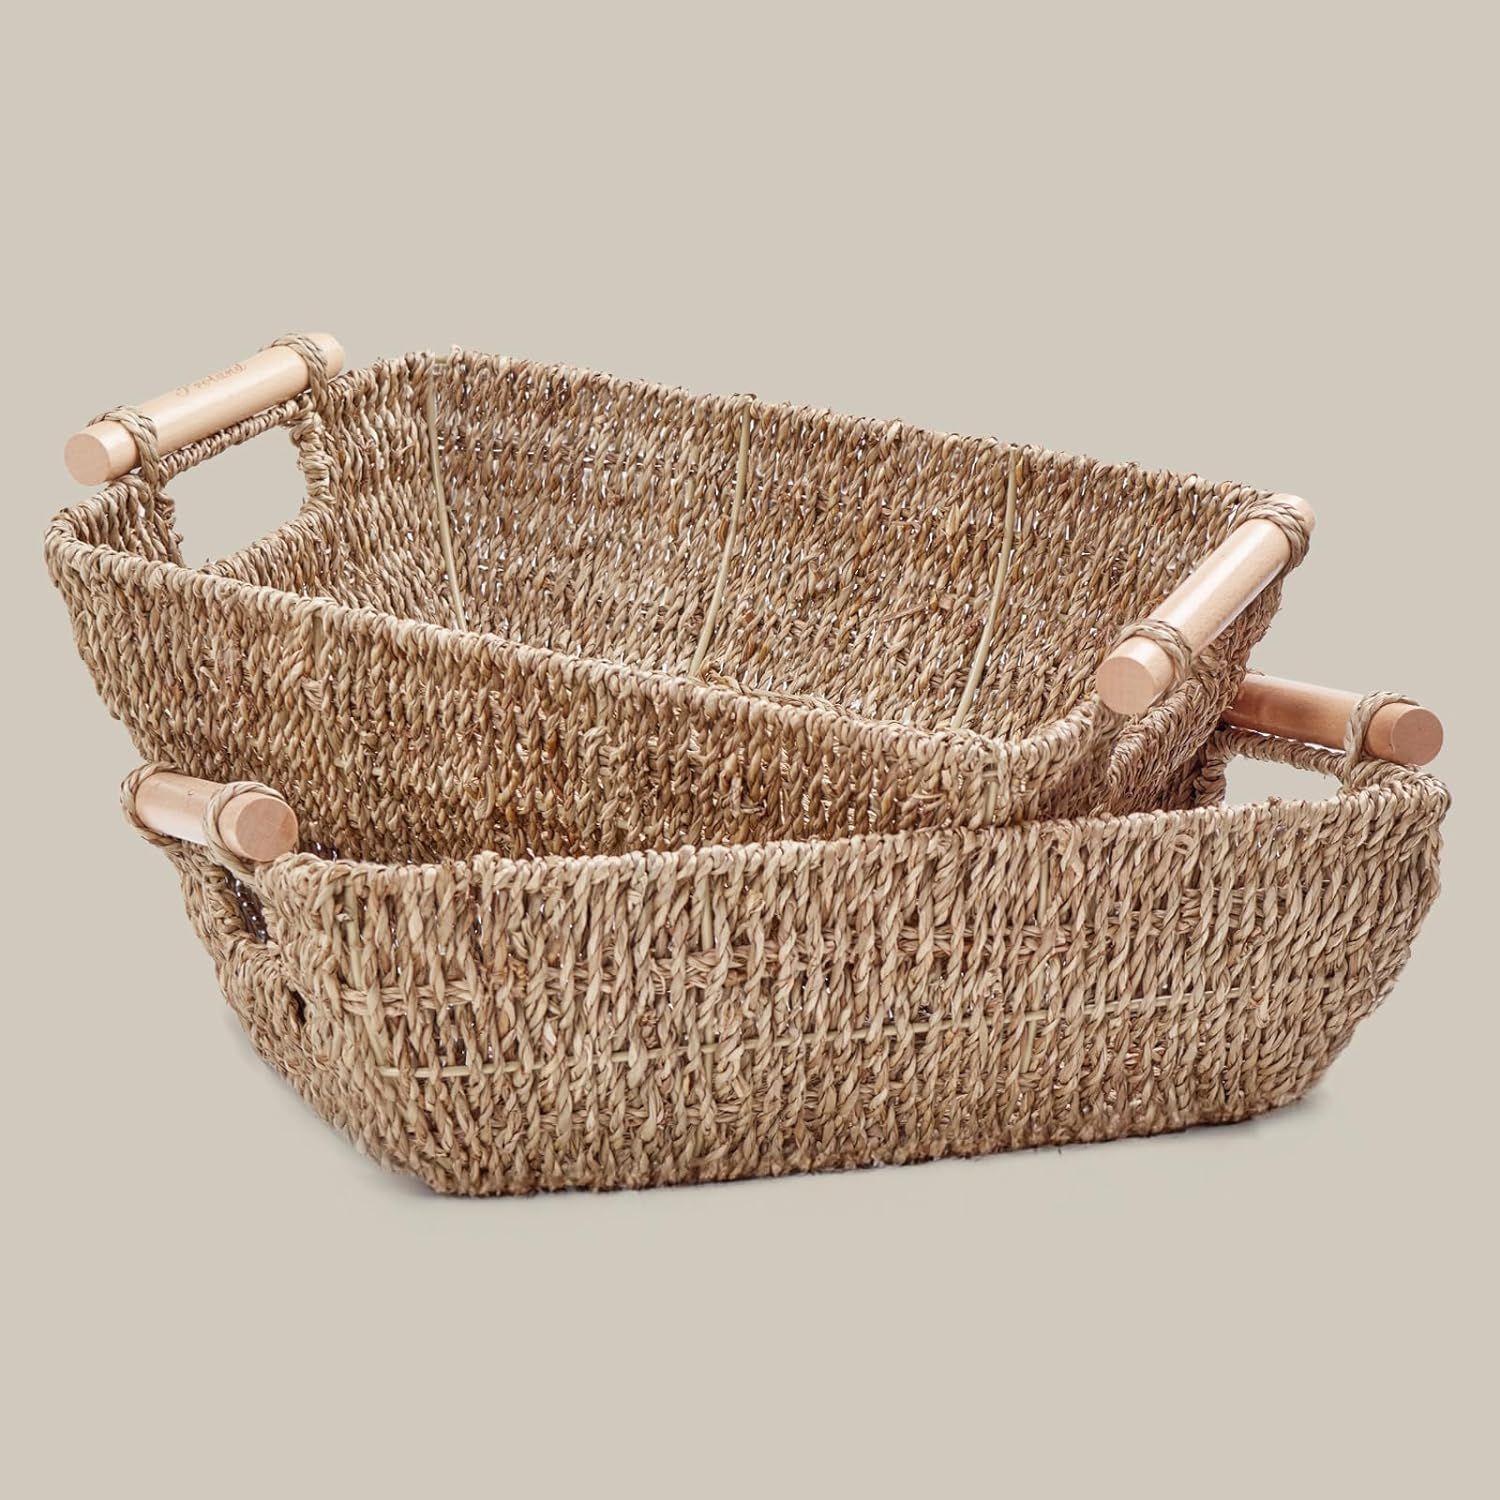 Storage Basket Hand-Woven Large Storage Baskets with Wooden Handles, Seagrass Wicker Baskets for ... | Amazon (US)